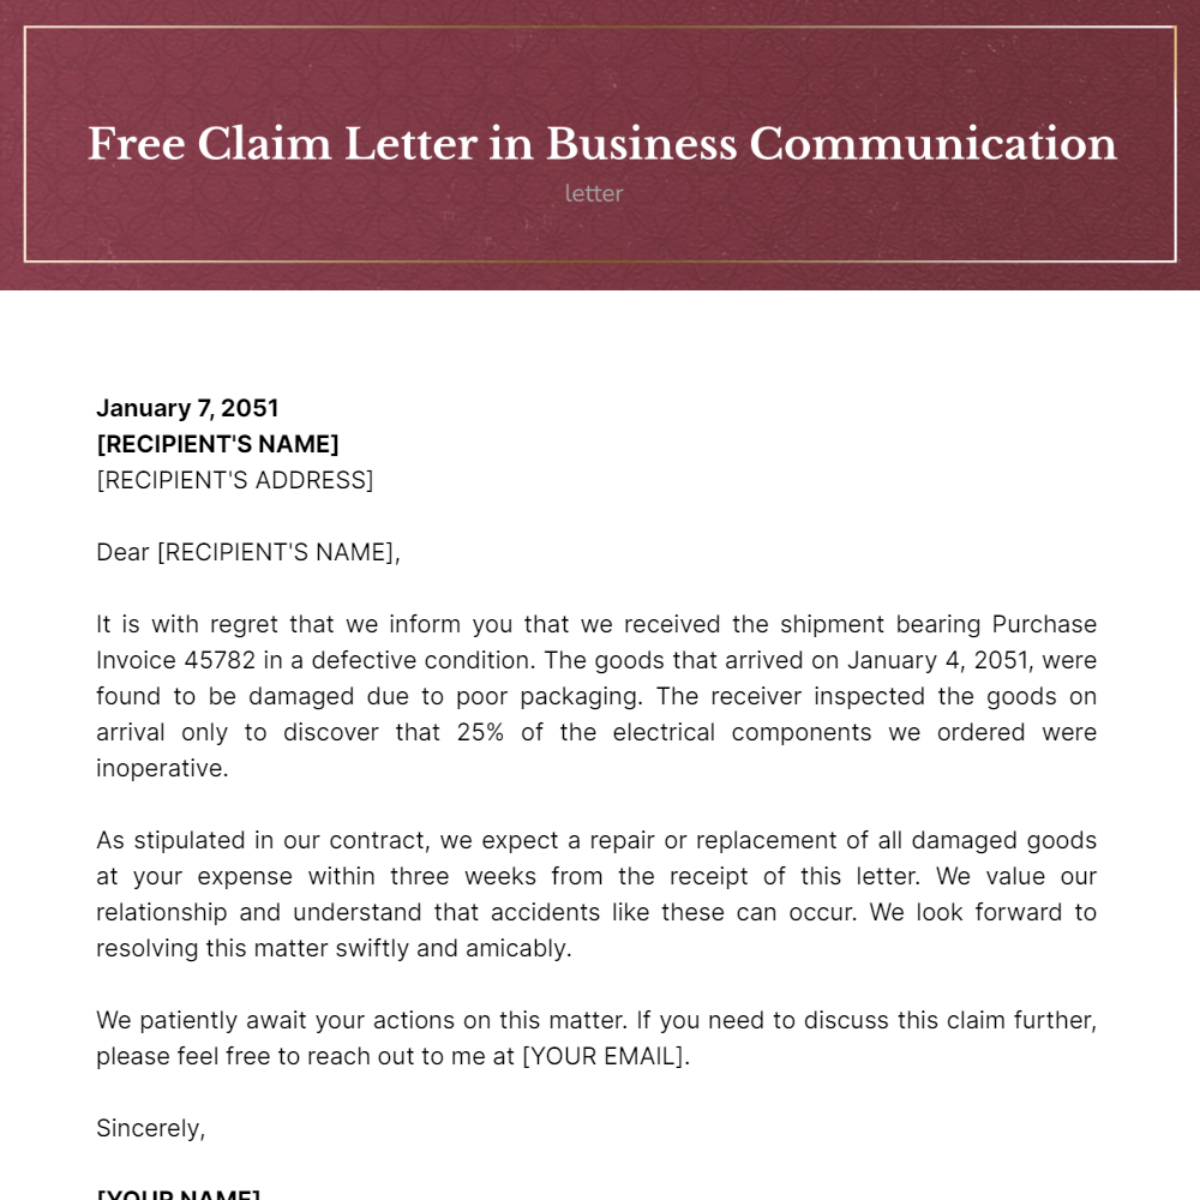 Claim Letter in Business Communication Template